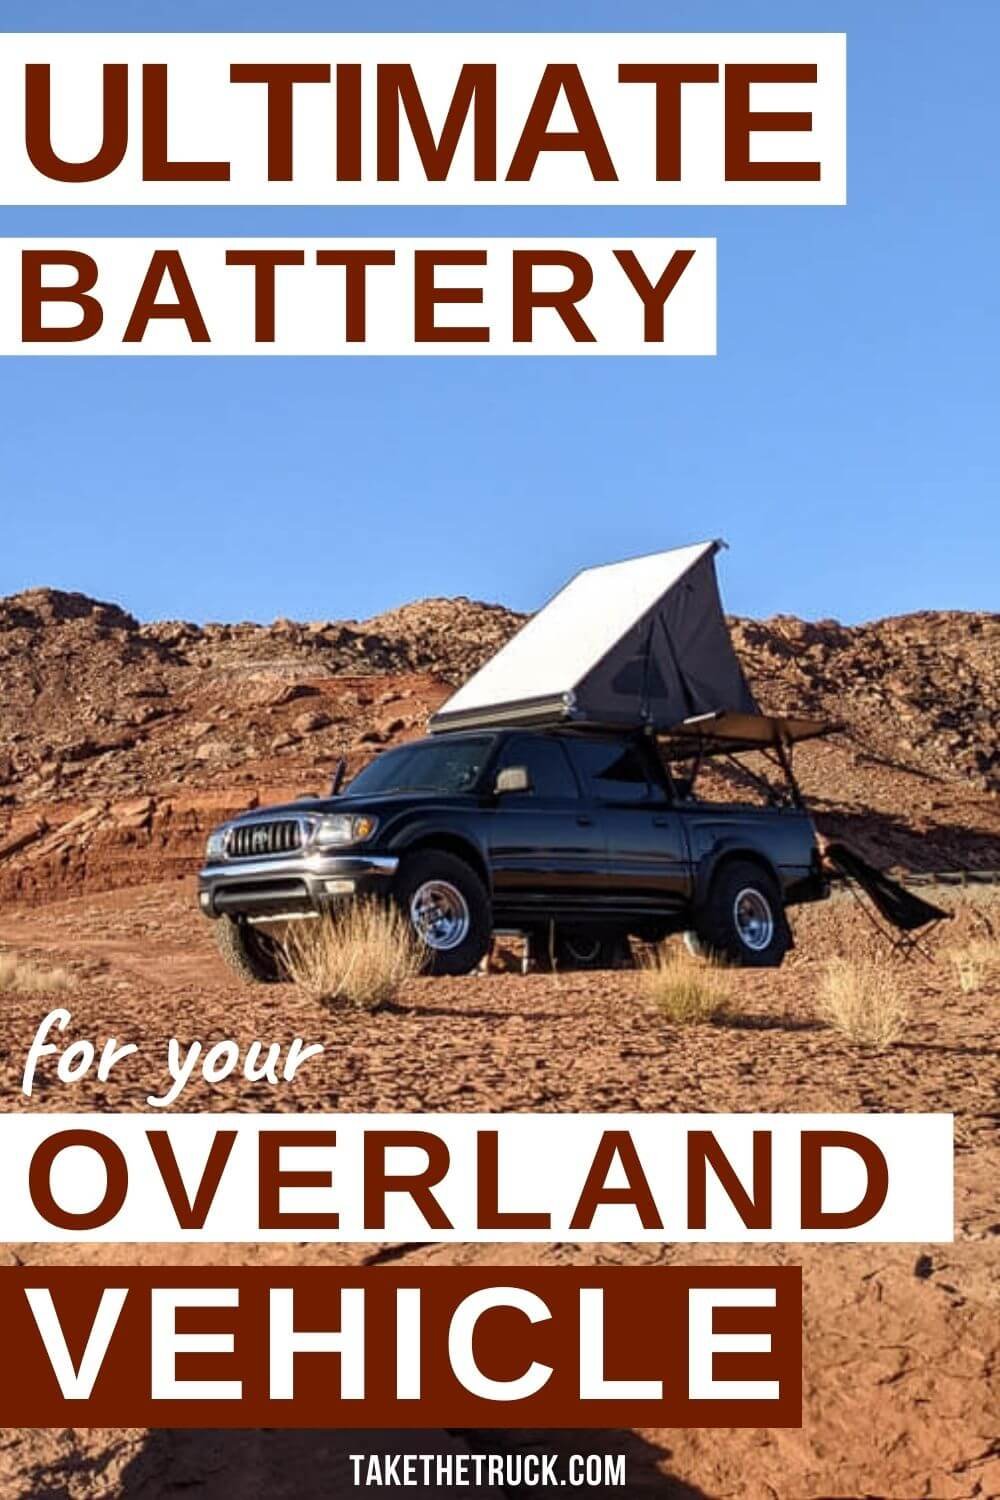 lithium car battery camping power | overland battery | camping battery setup |  | Camping power | overland dual battery alternate | camping battery power | deep cycle camping battery | 